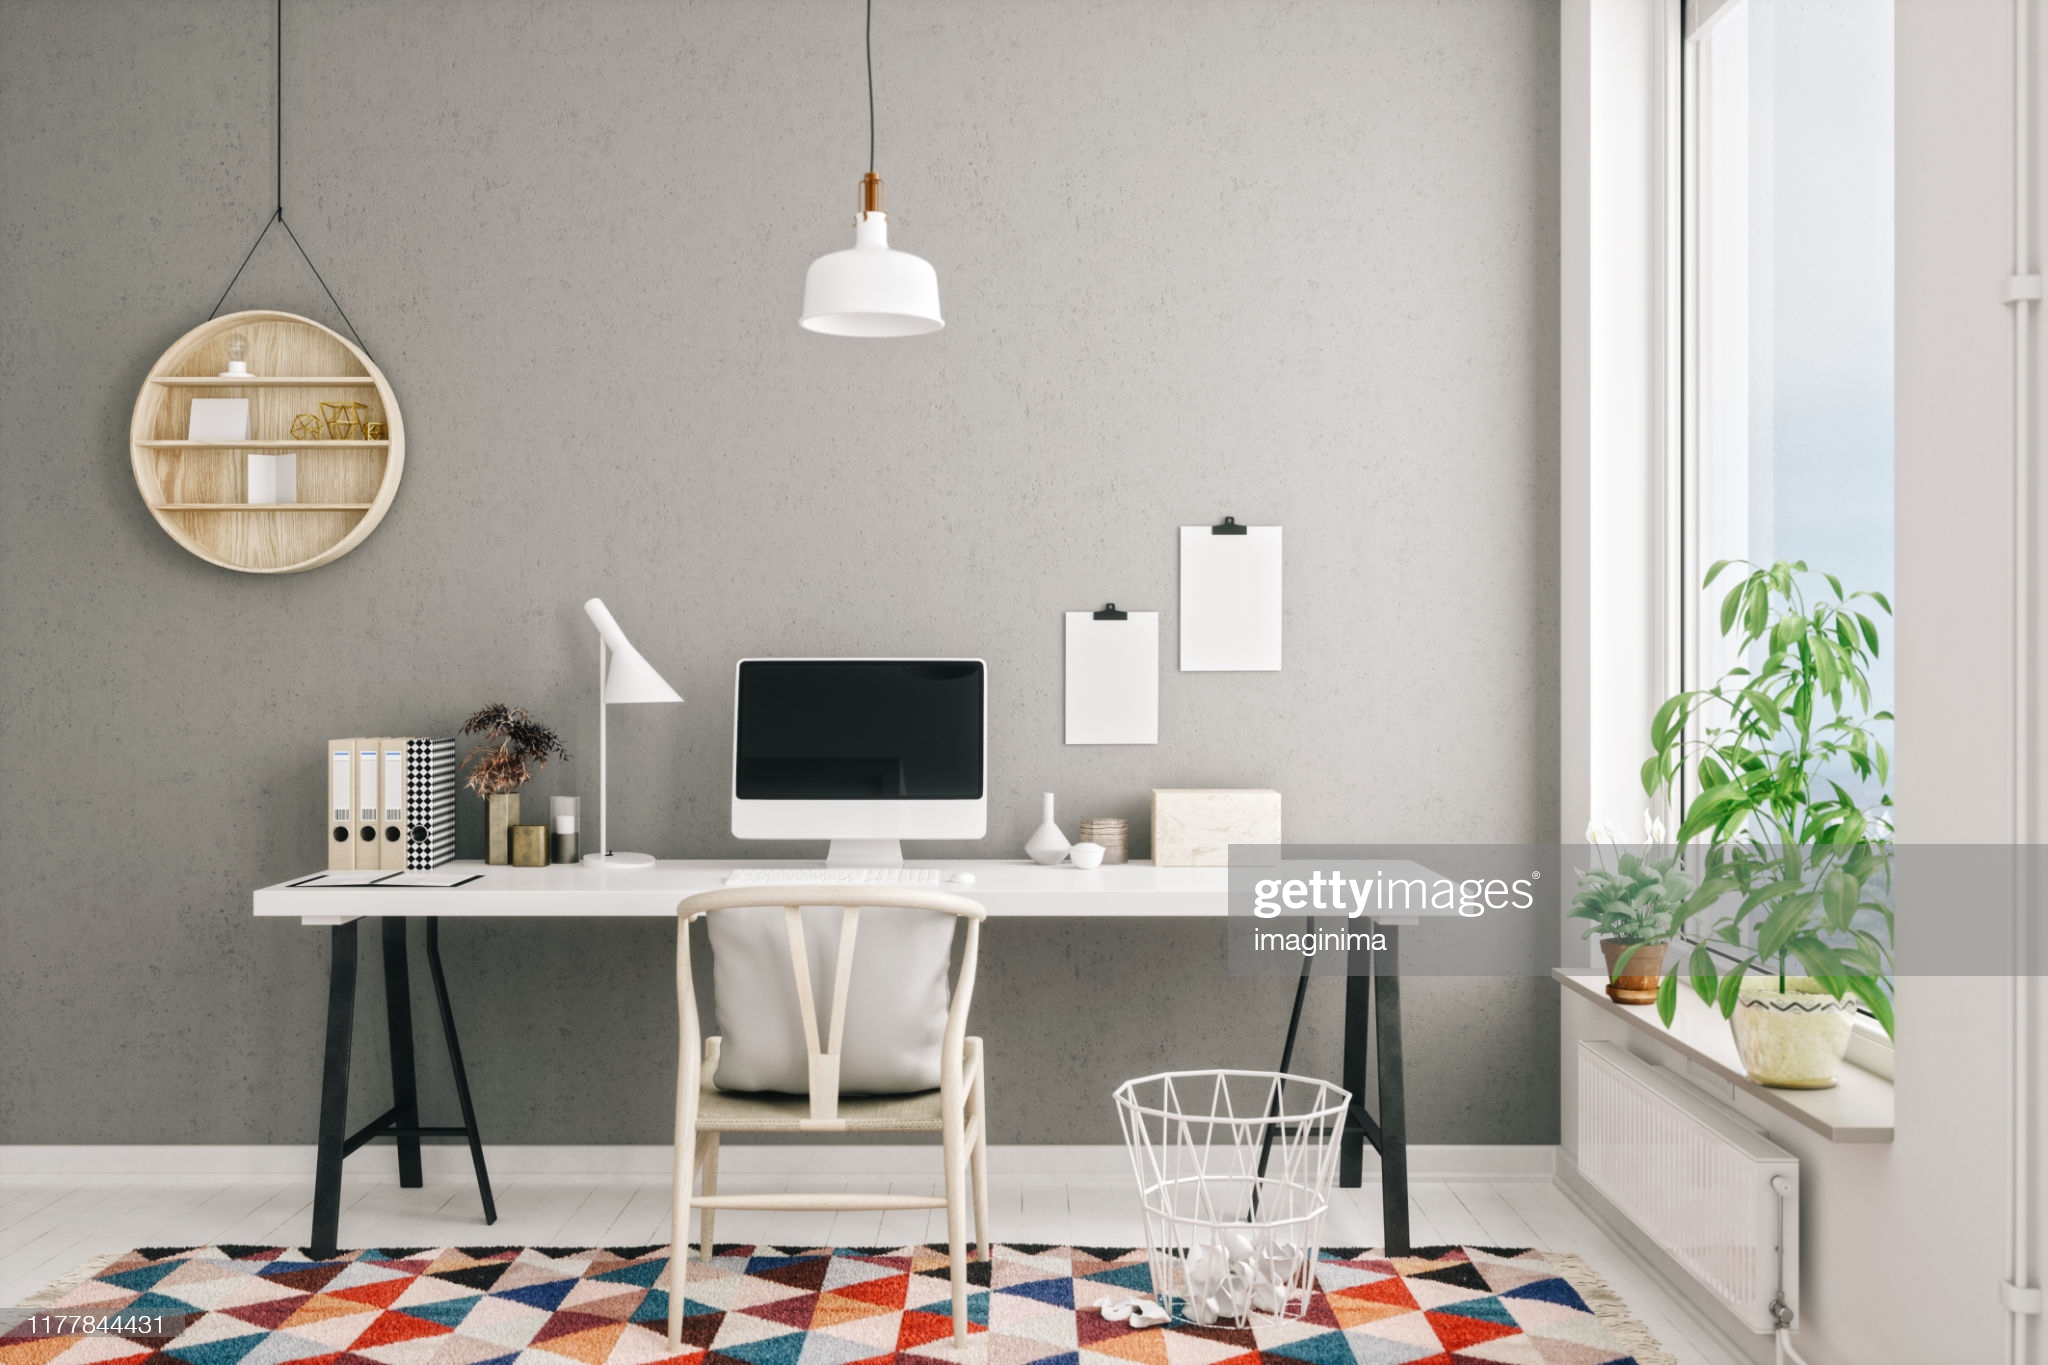 Stock photo syndrome example: A perfect desk for browsing the internet or starting your own business